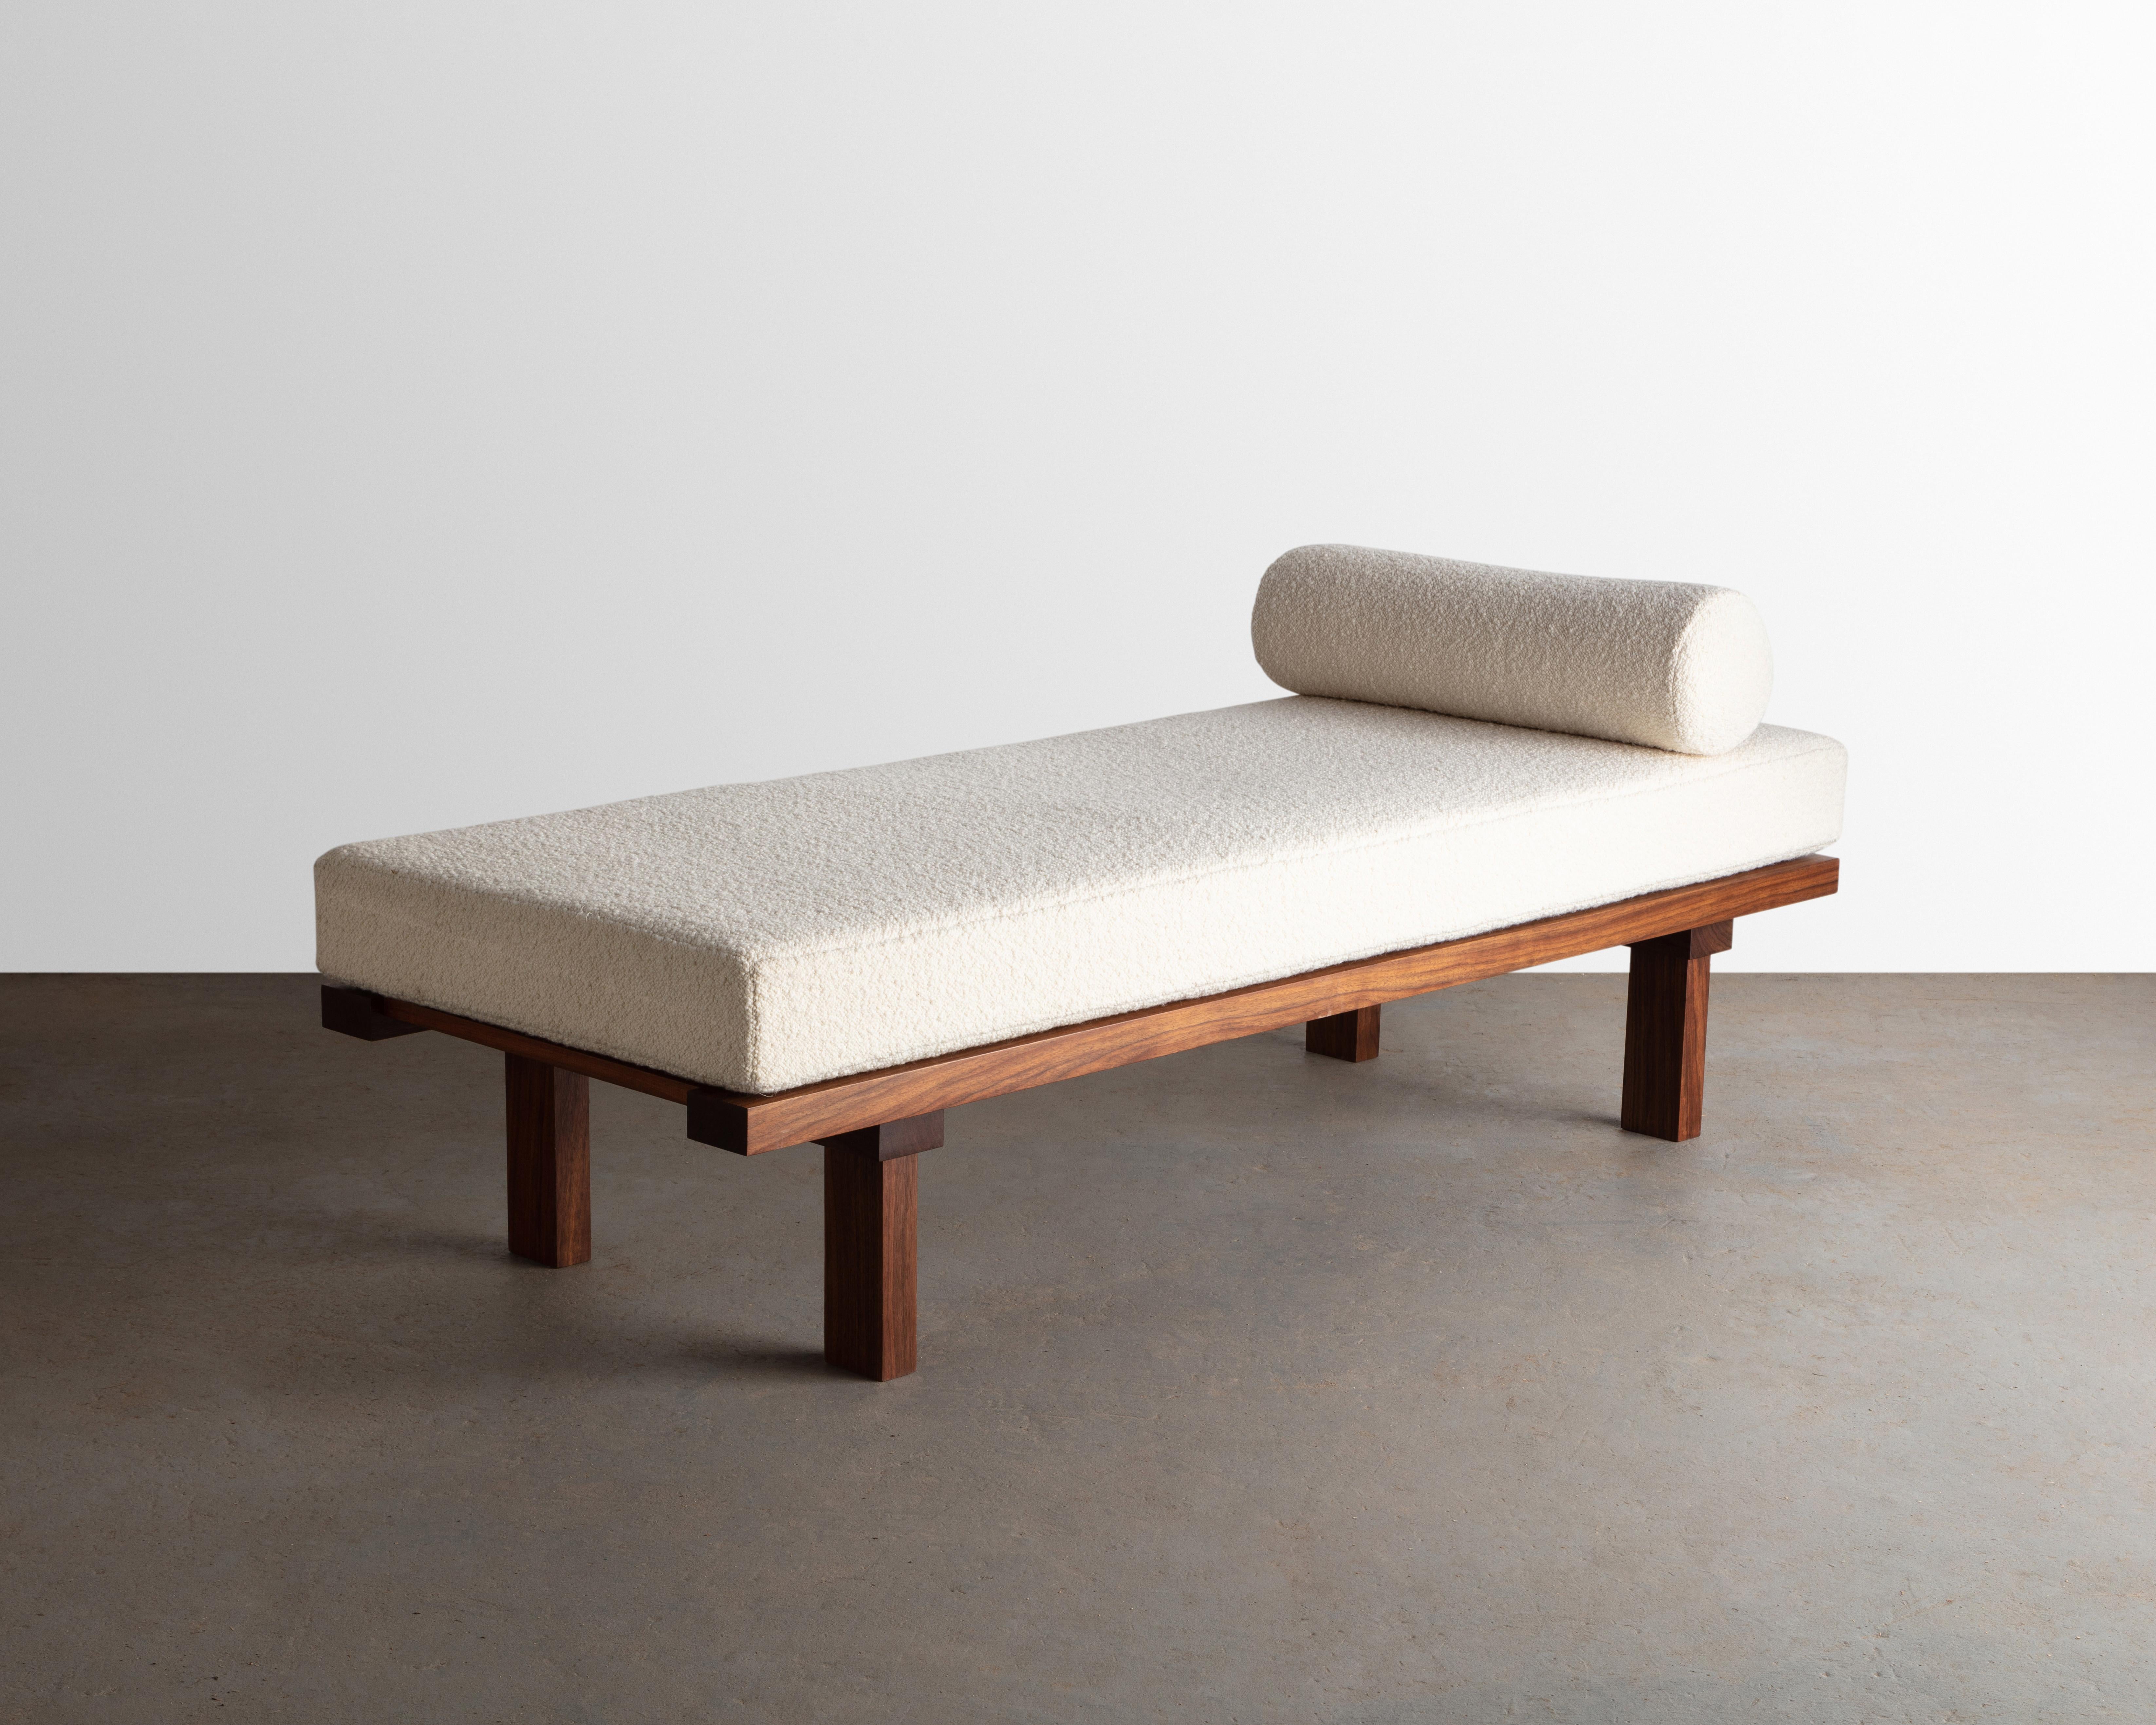 Constructed from solid walnut this Japanese jointed Daybed is designed and built to last. Its mattresses and bolster are upholstered with a natural Bouclé fabric.

We also offer COM on all work. 

Send us your own fabric and we will upholster the